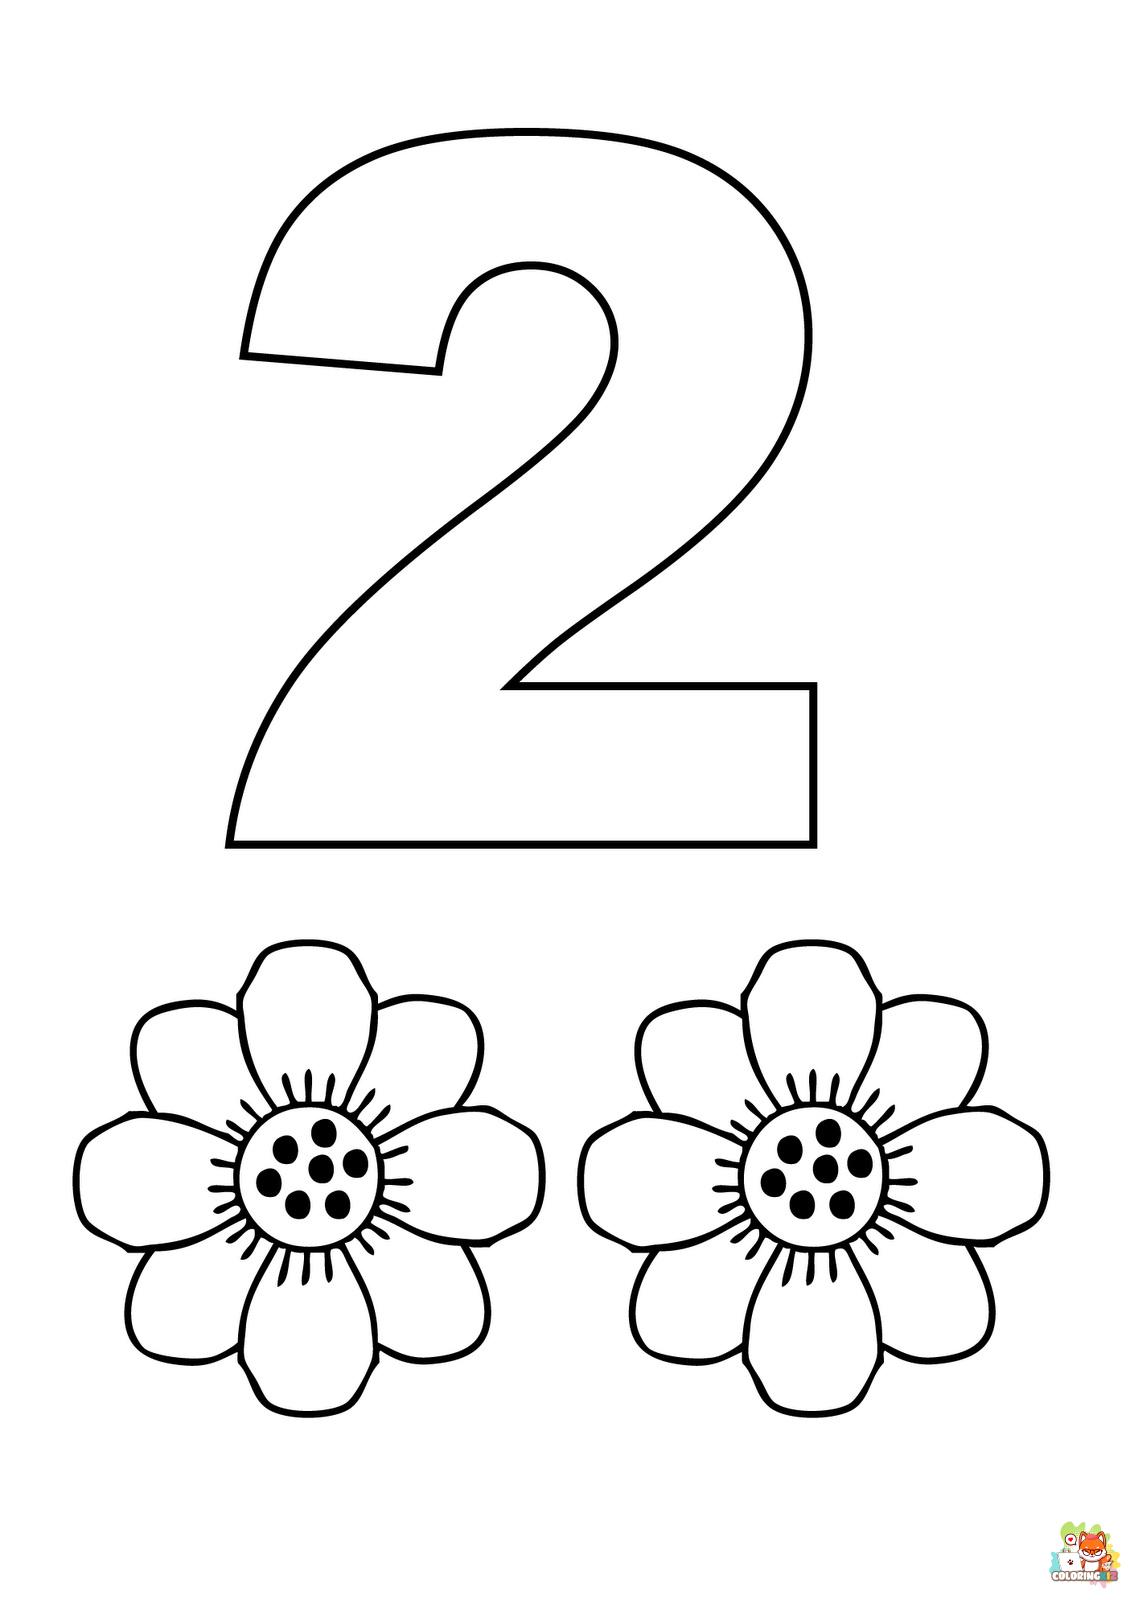 Free Number 2 coloring pages for kids